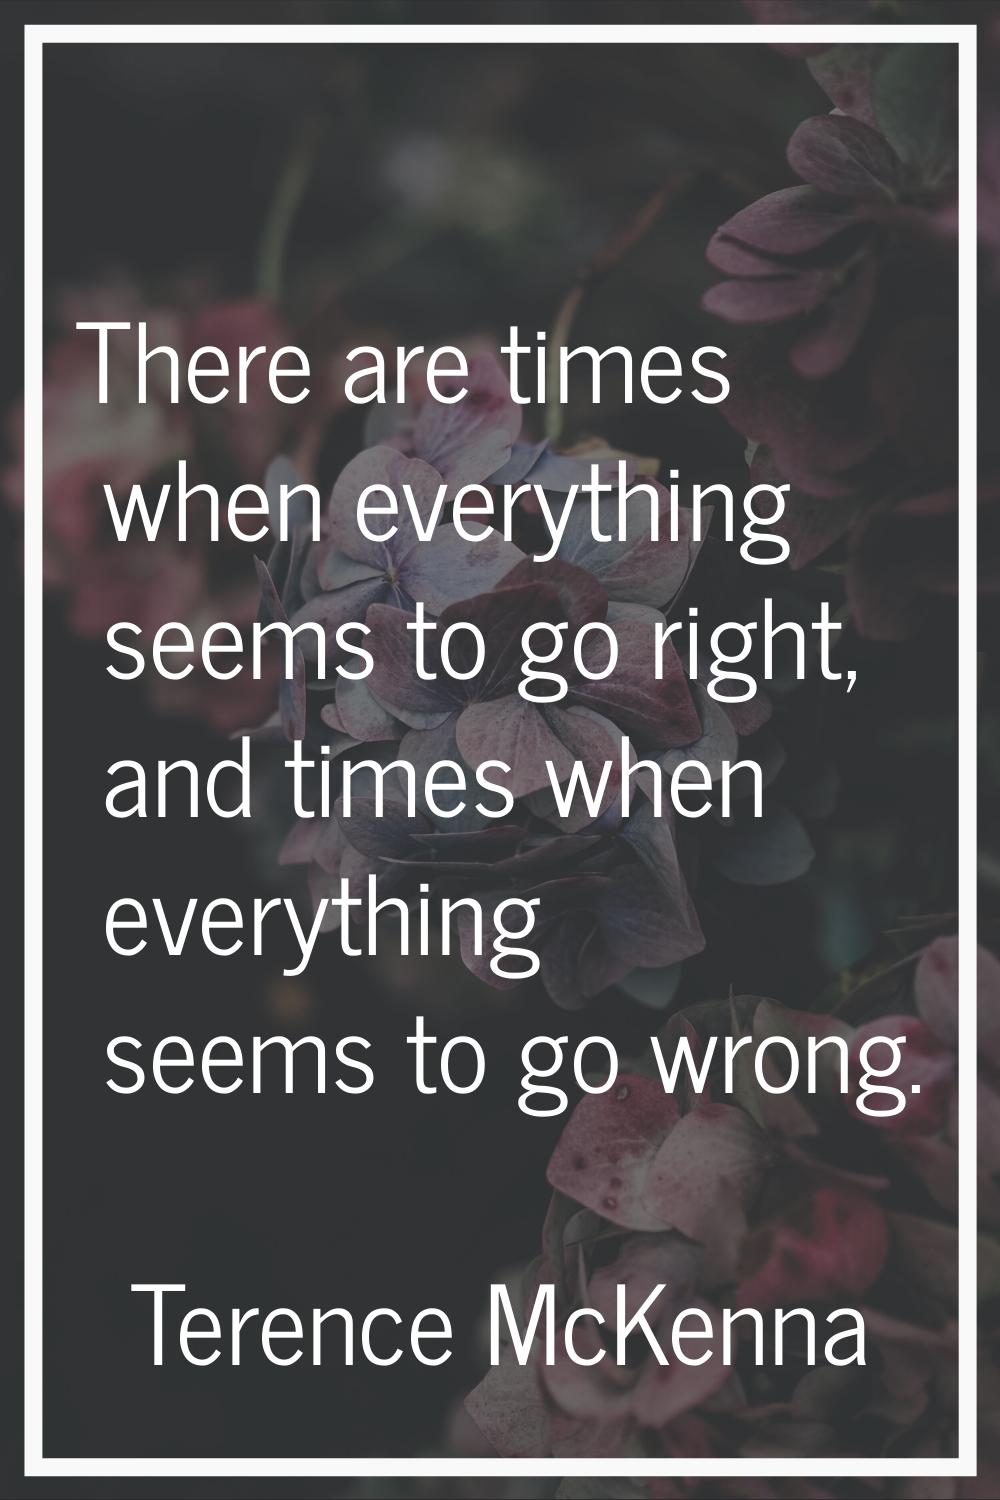 There are times when everything seems to go right, and times when everything seems to go wrong.